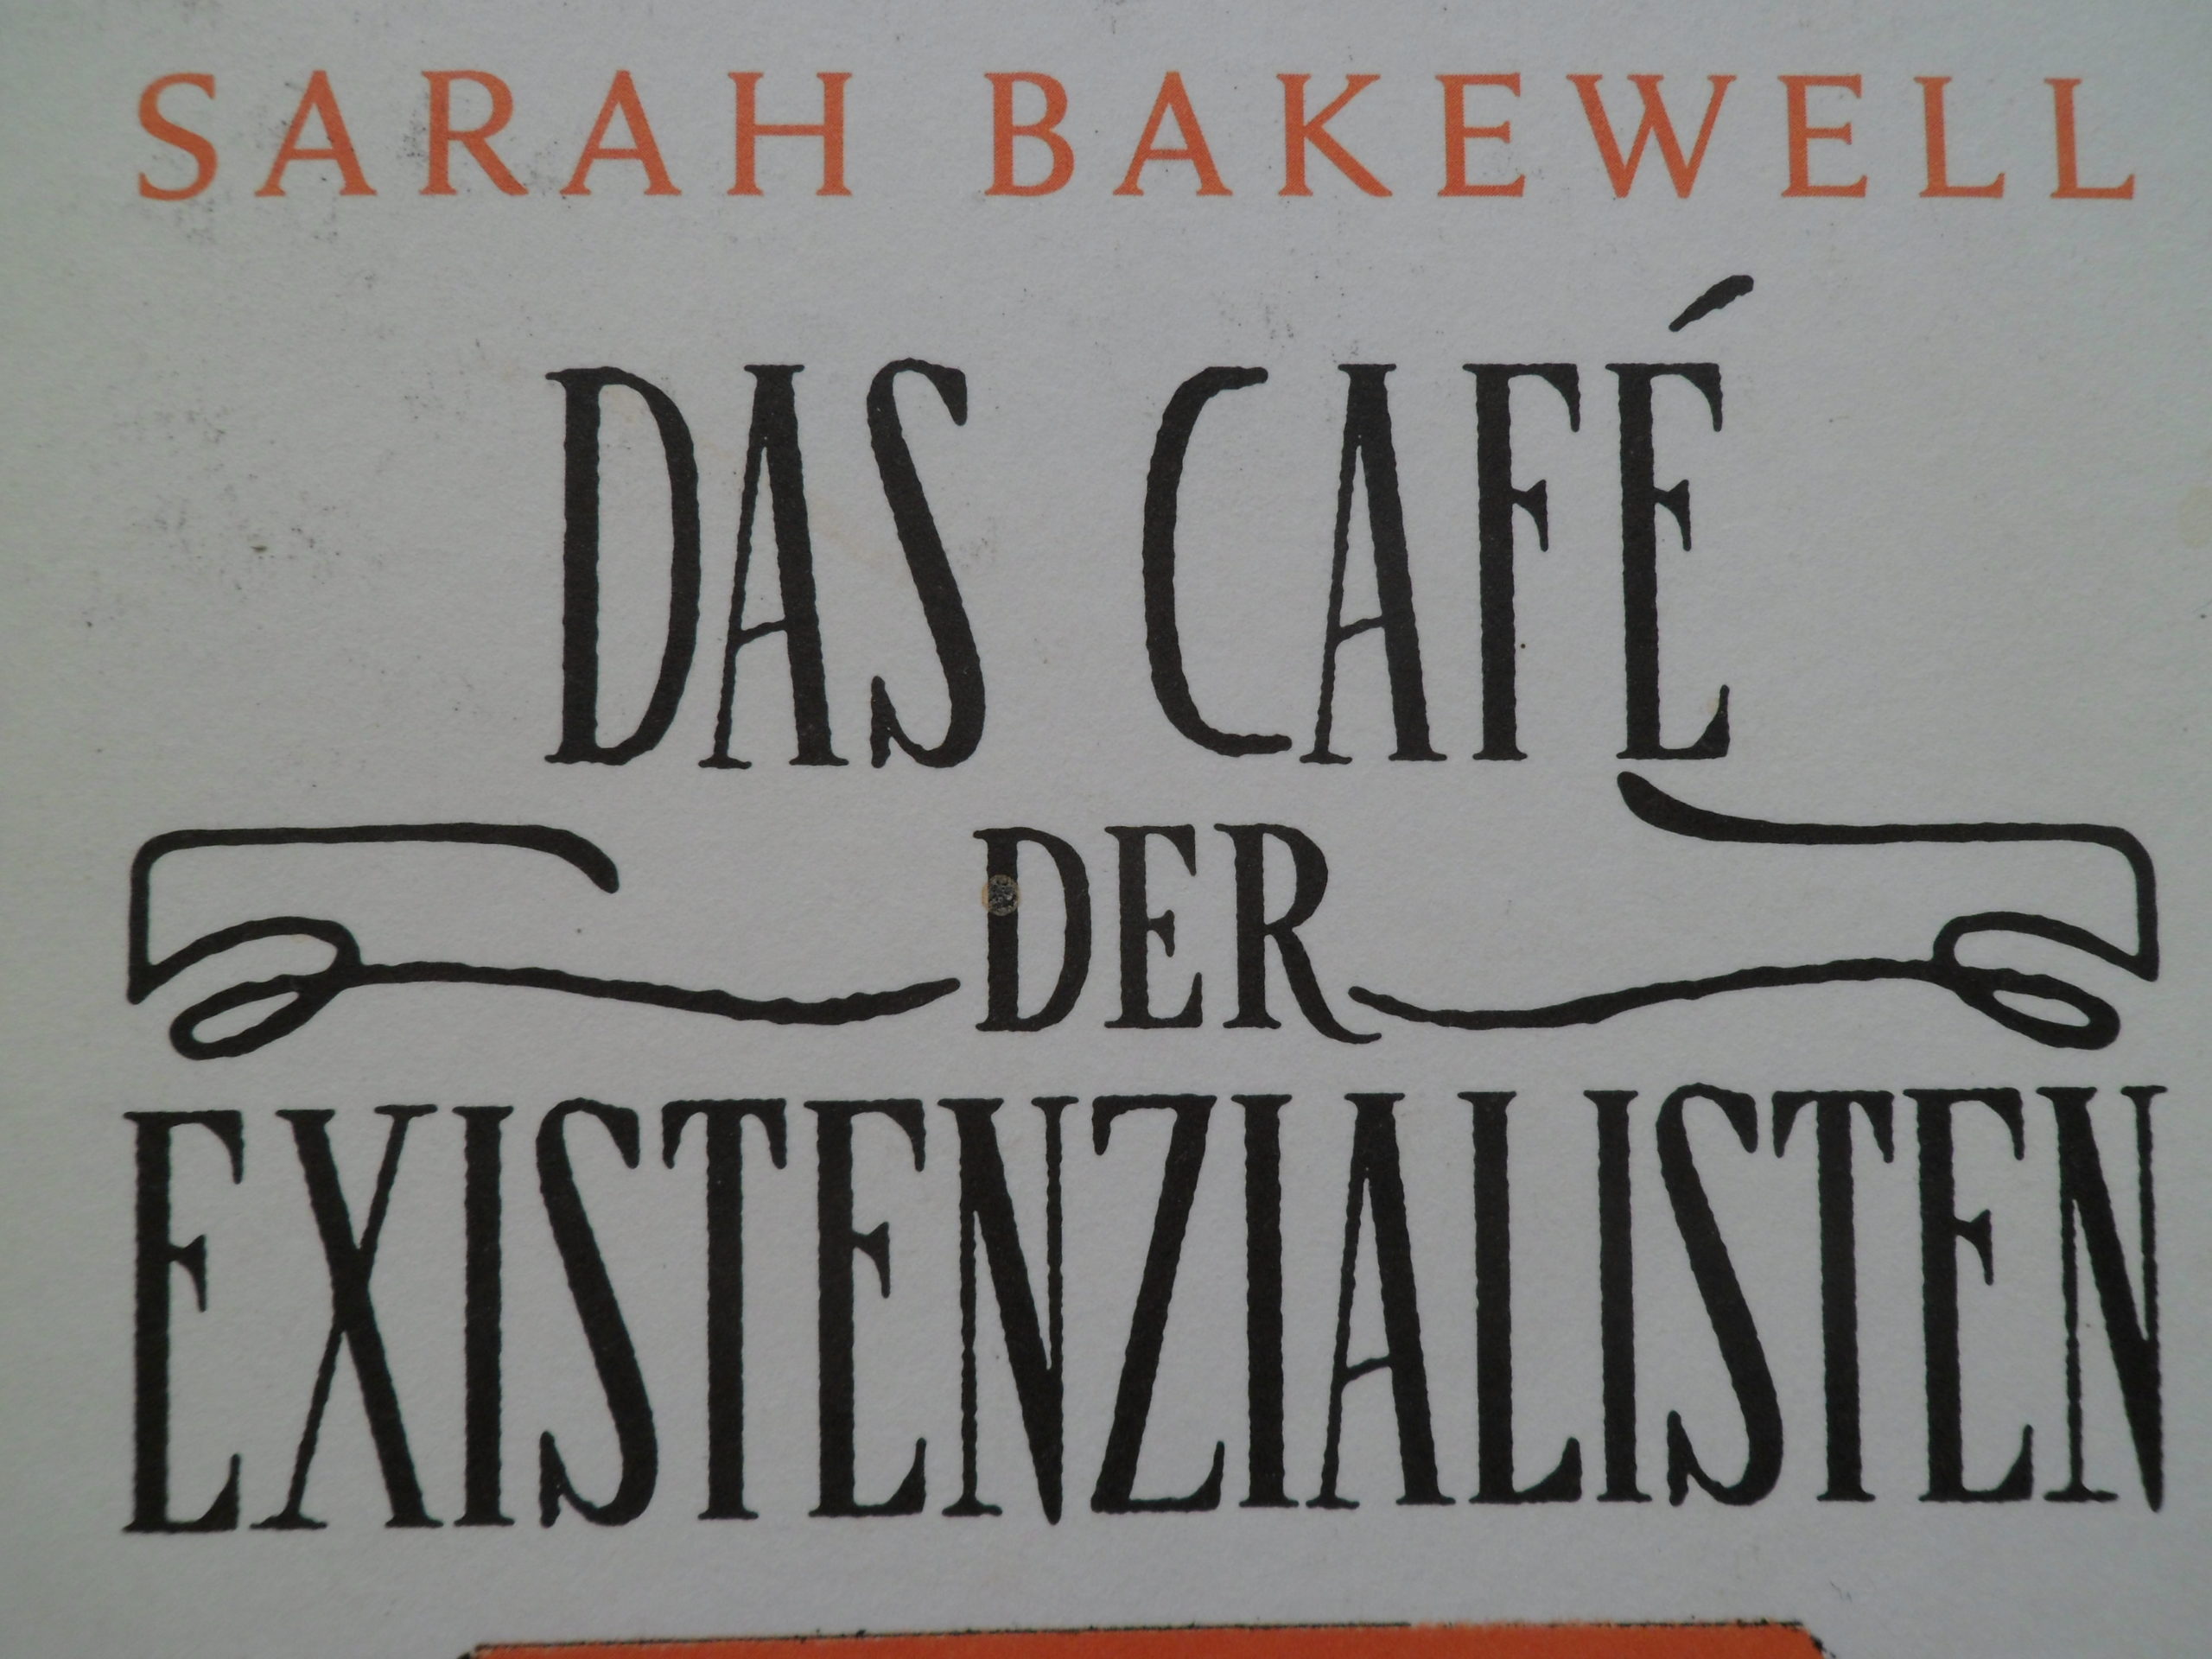 You are currently viewing Das Cafe der Existenzialisten